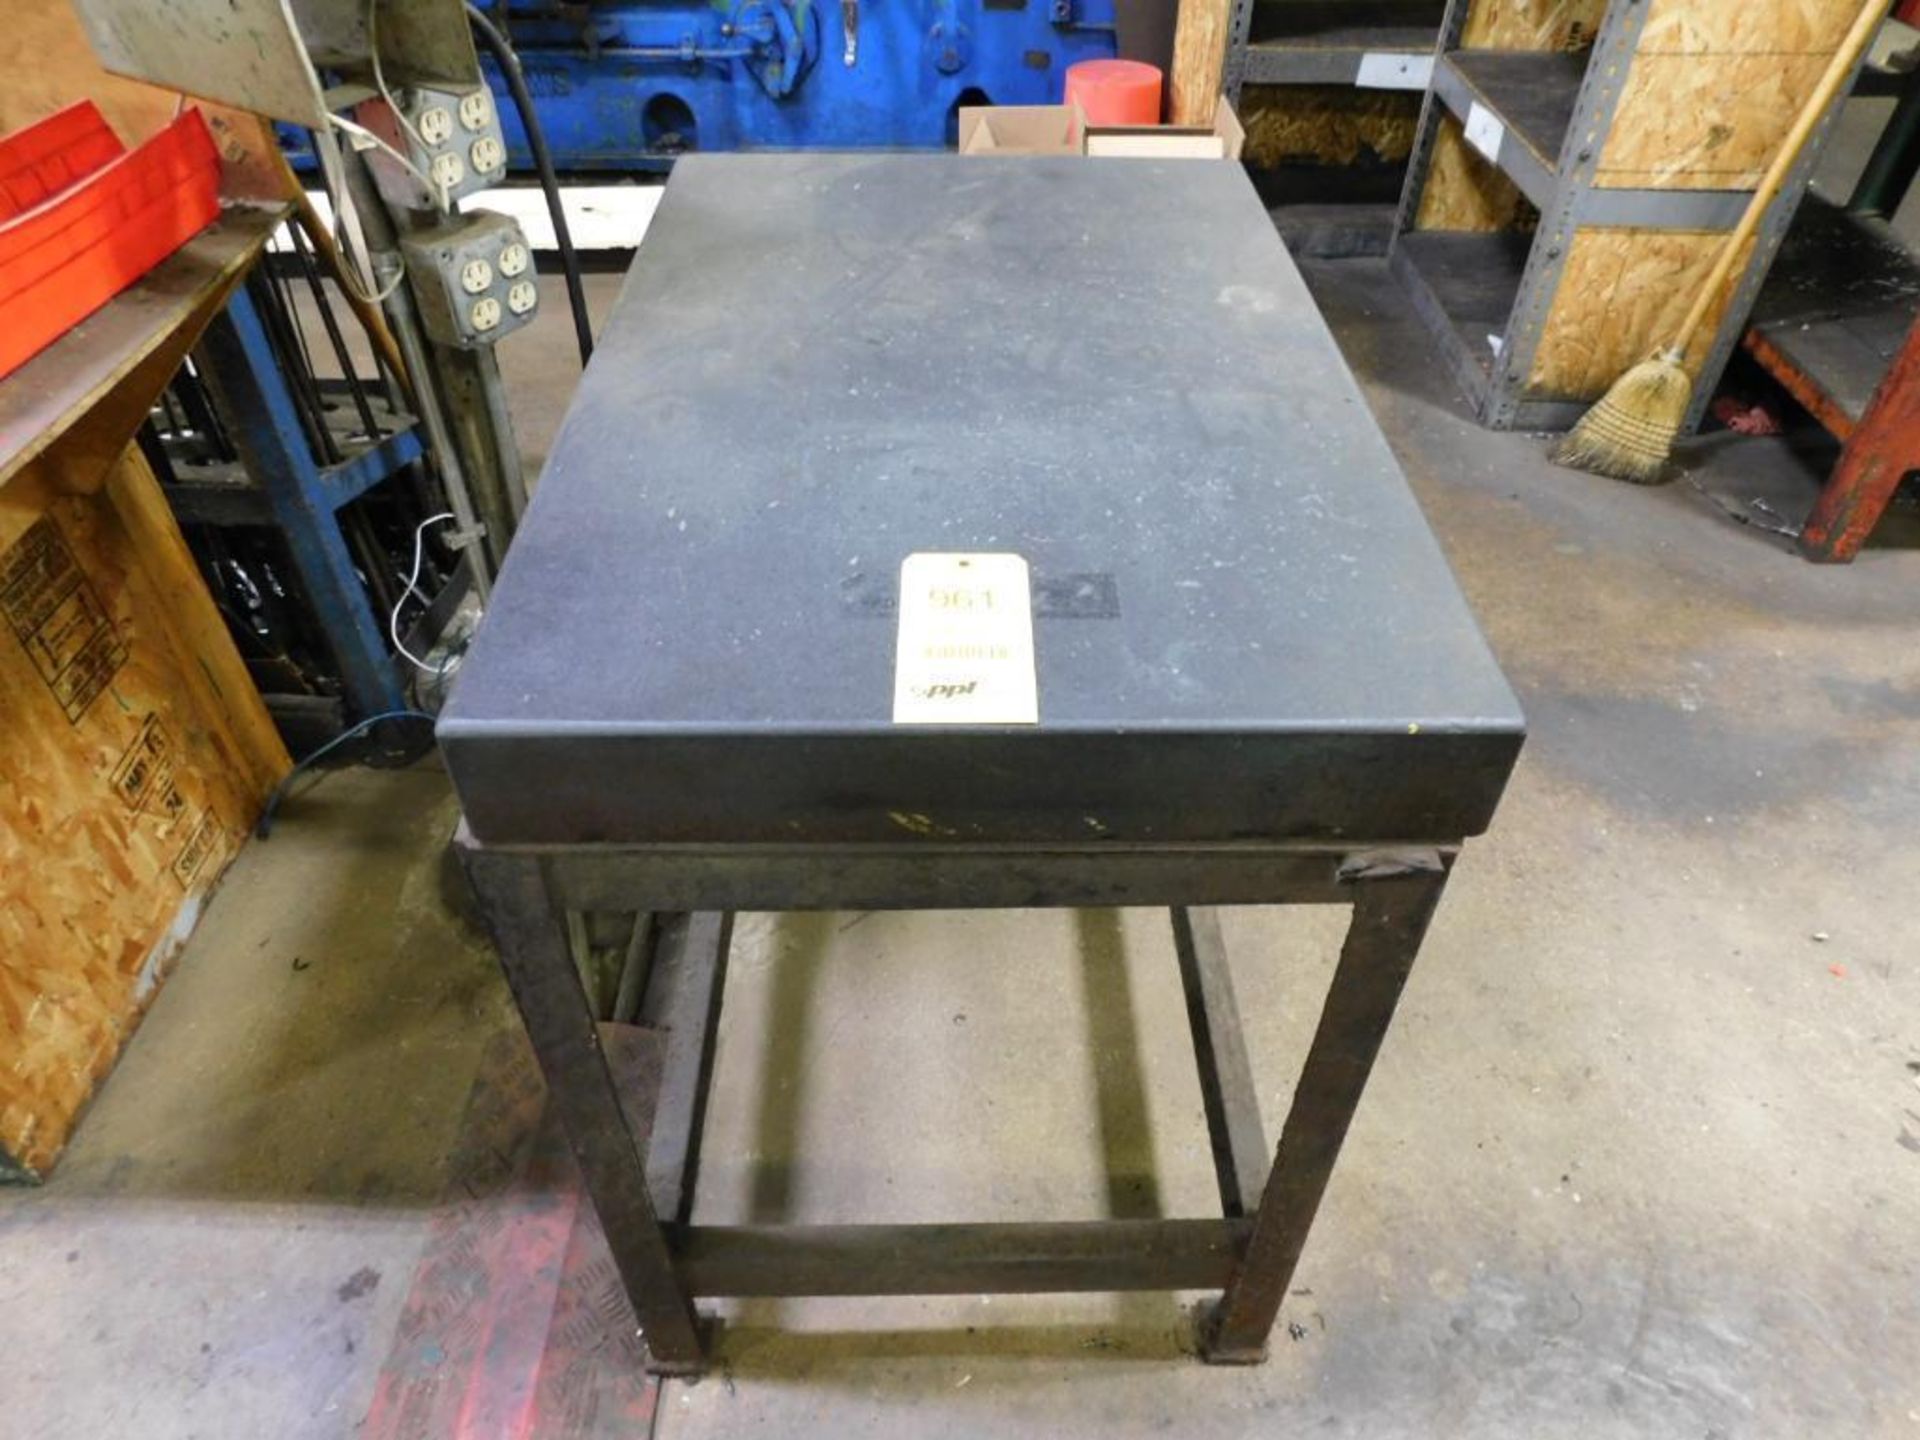 LOT: (1) 48" x 36" Granite Surface Plate on Steel Base, (1) 36" x 24" Granite Surface Plate on Steel